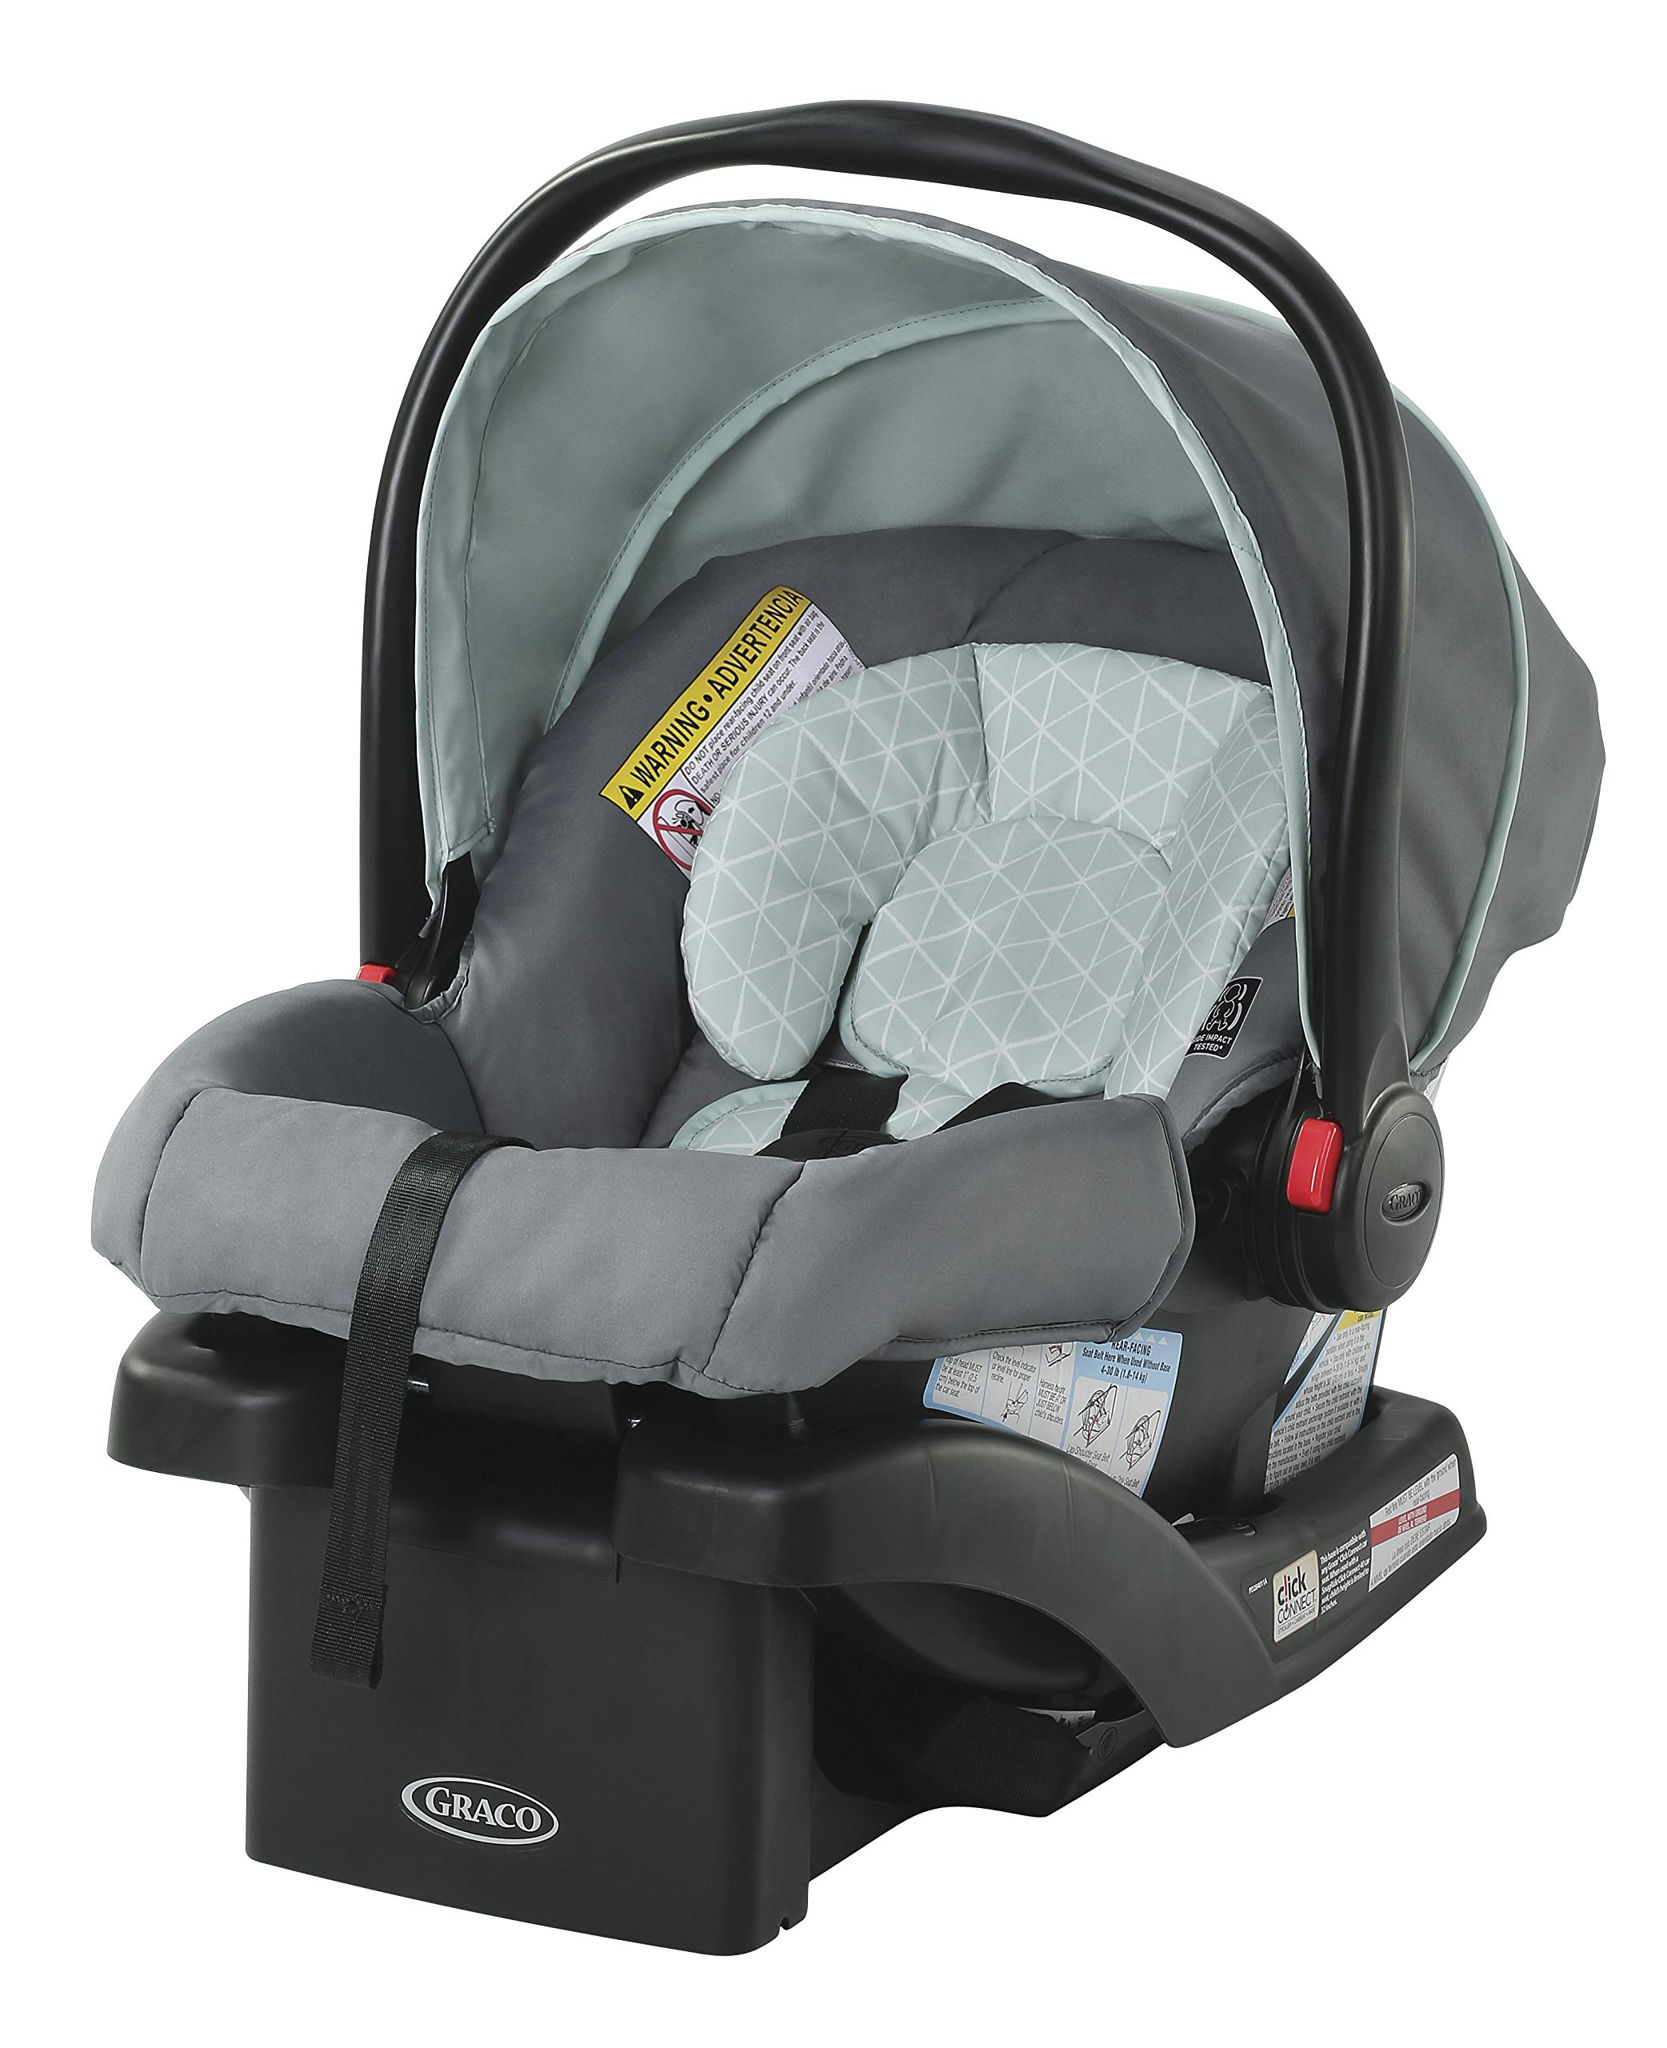 top stroller carseat combo 2018